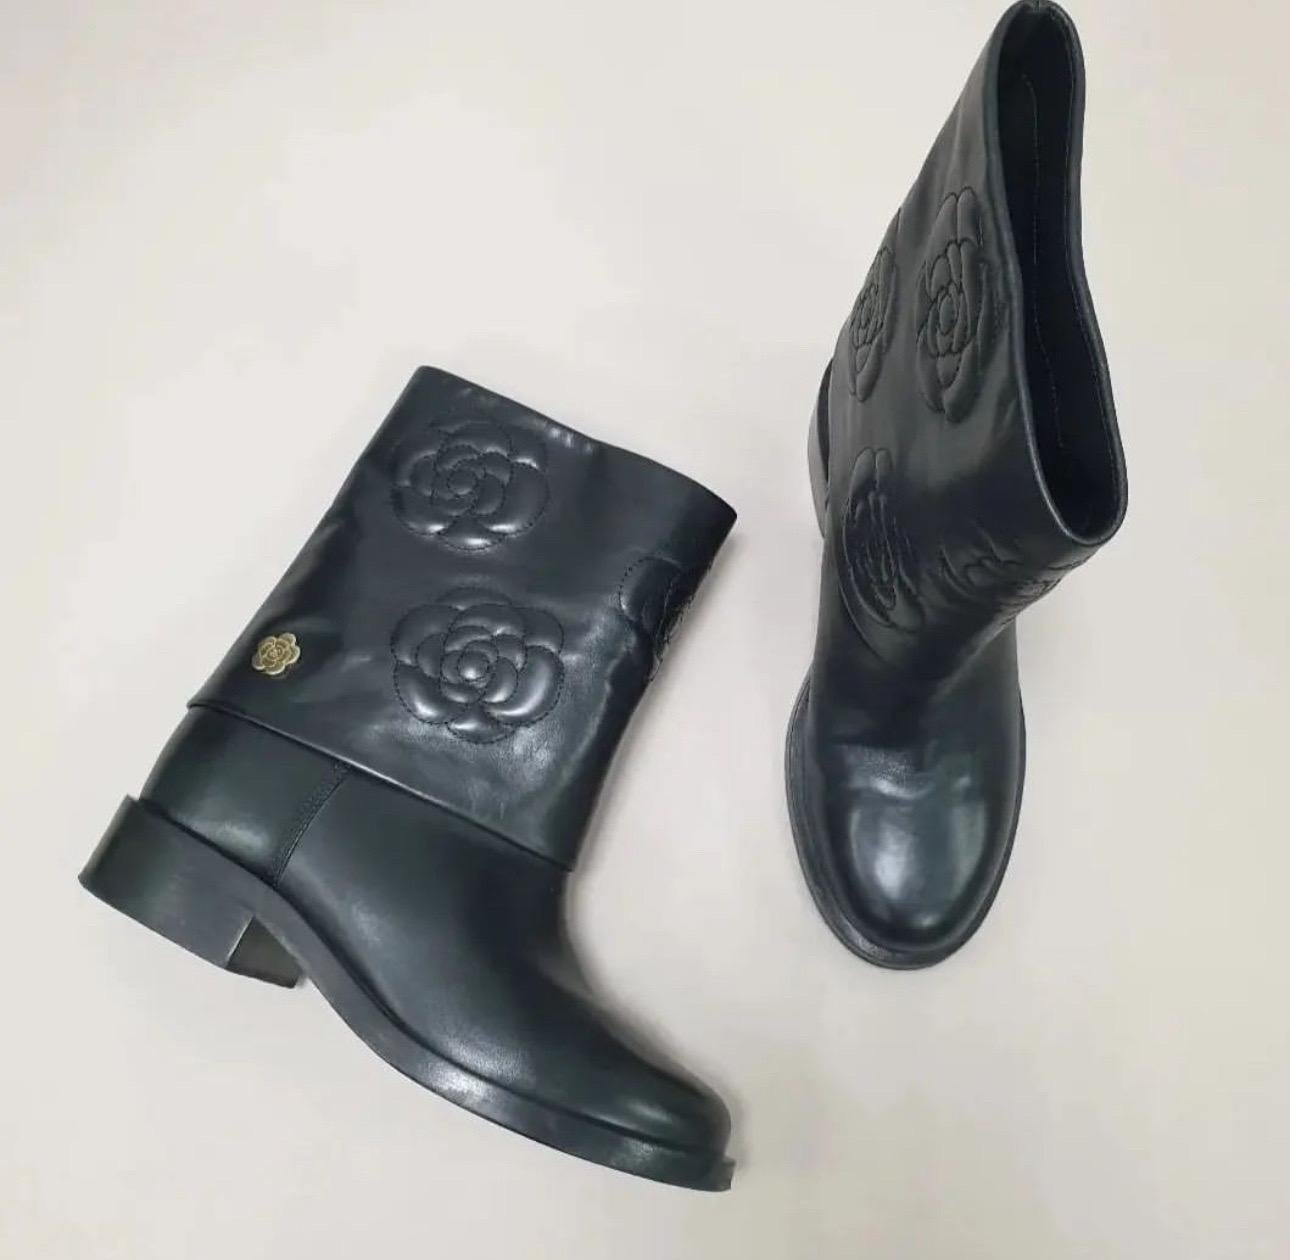 CHANEL 2016 Camellia Flower Black Leather Mid Calf Boots In Good Condition For Sale In Krakow, PL